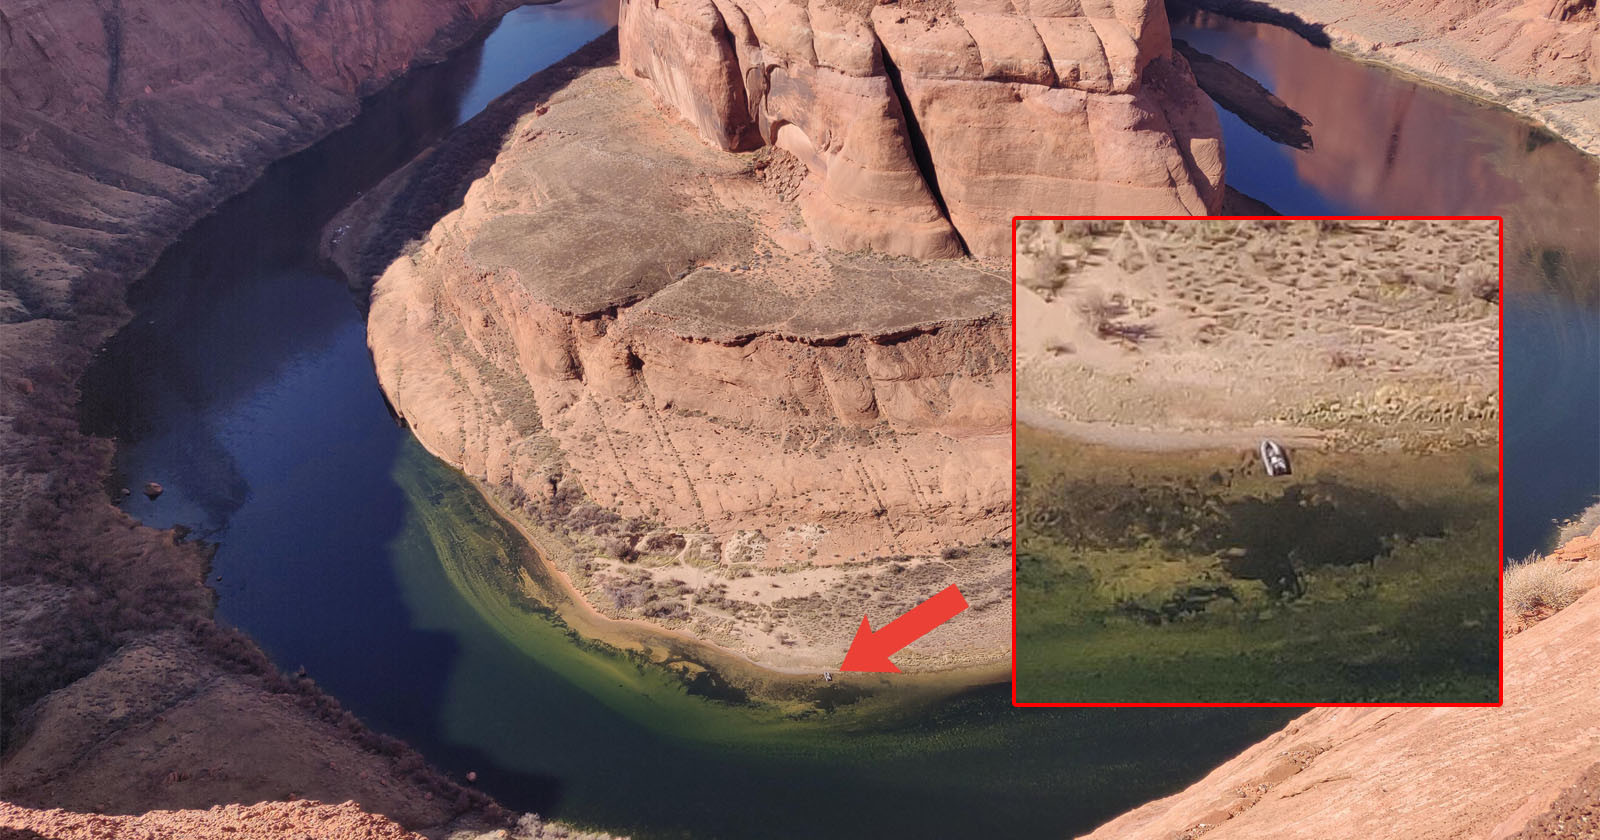 This is the Famous Horseshoe Bend with a Boat for Scale